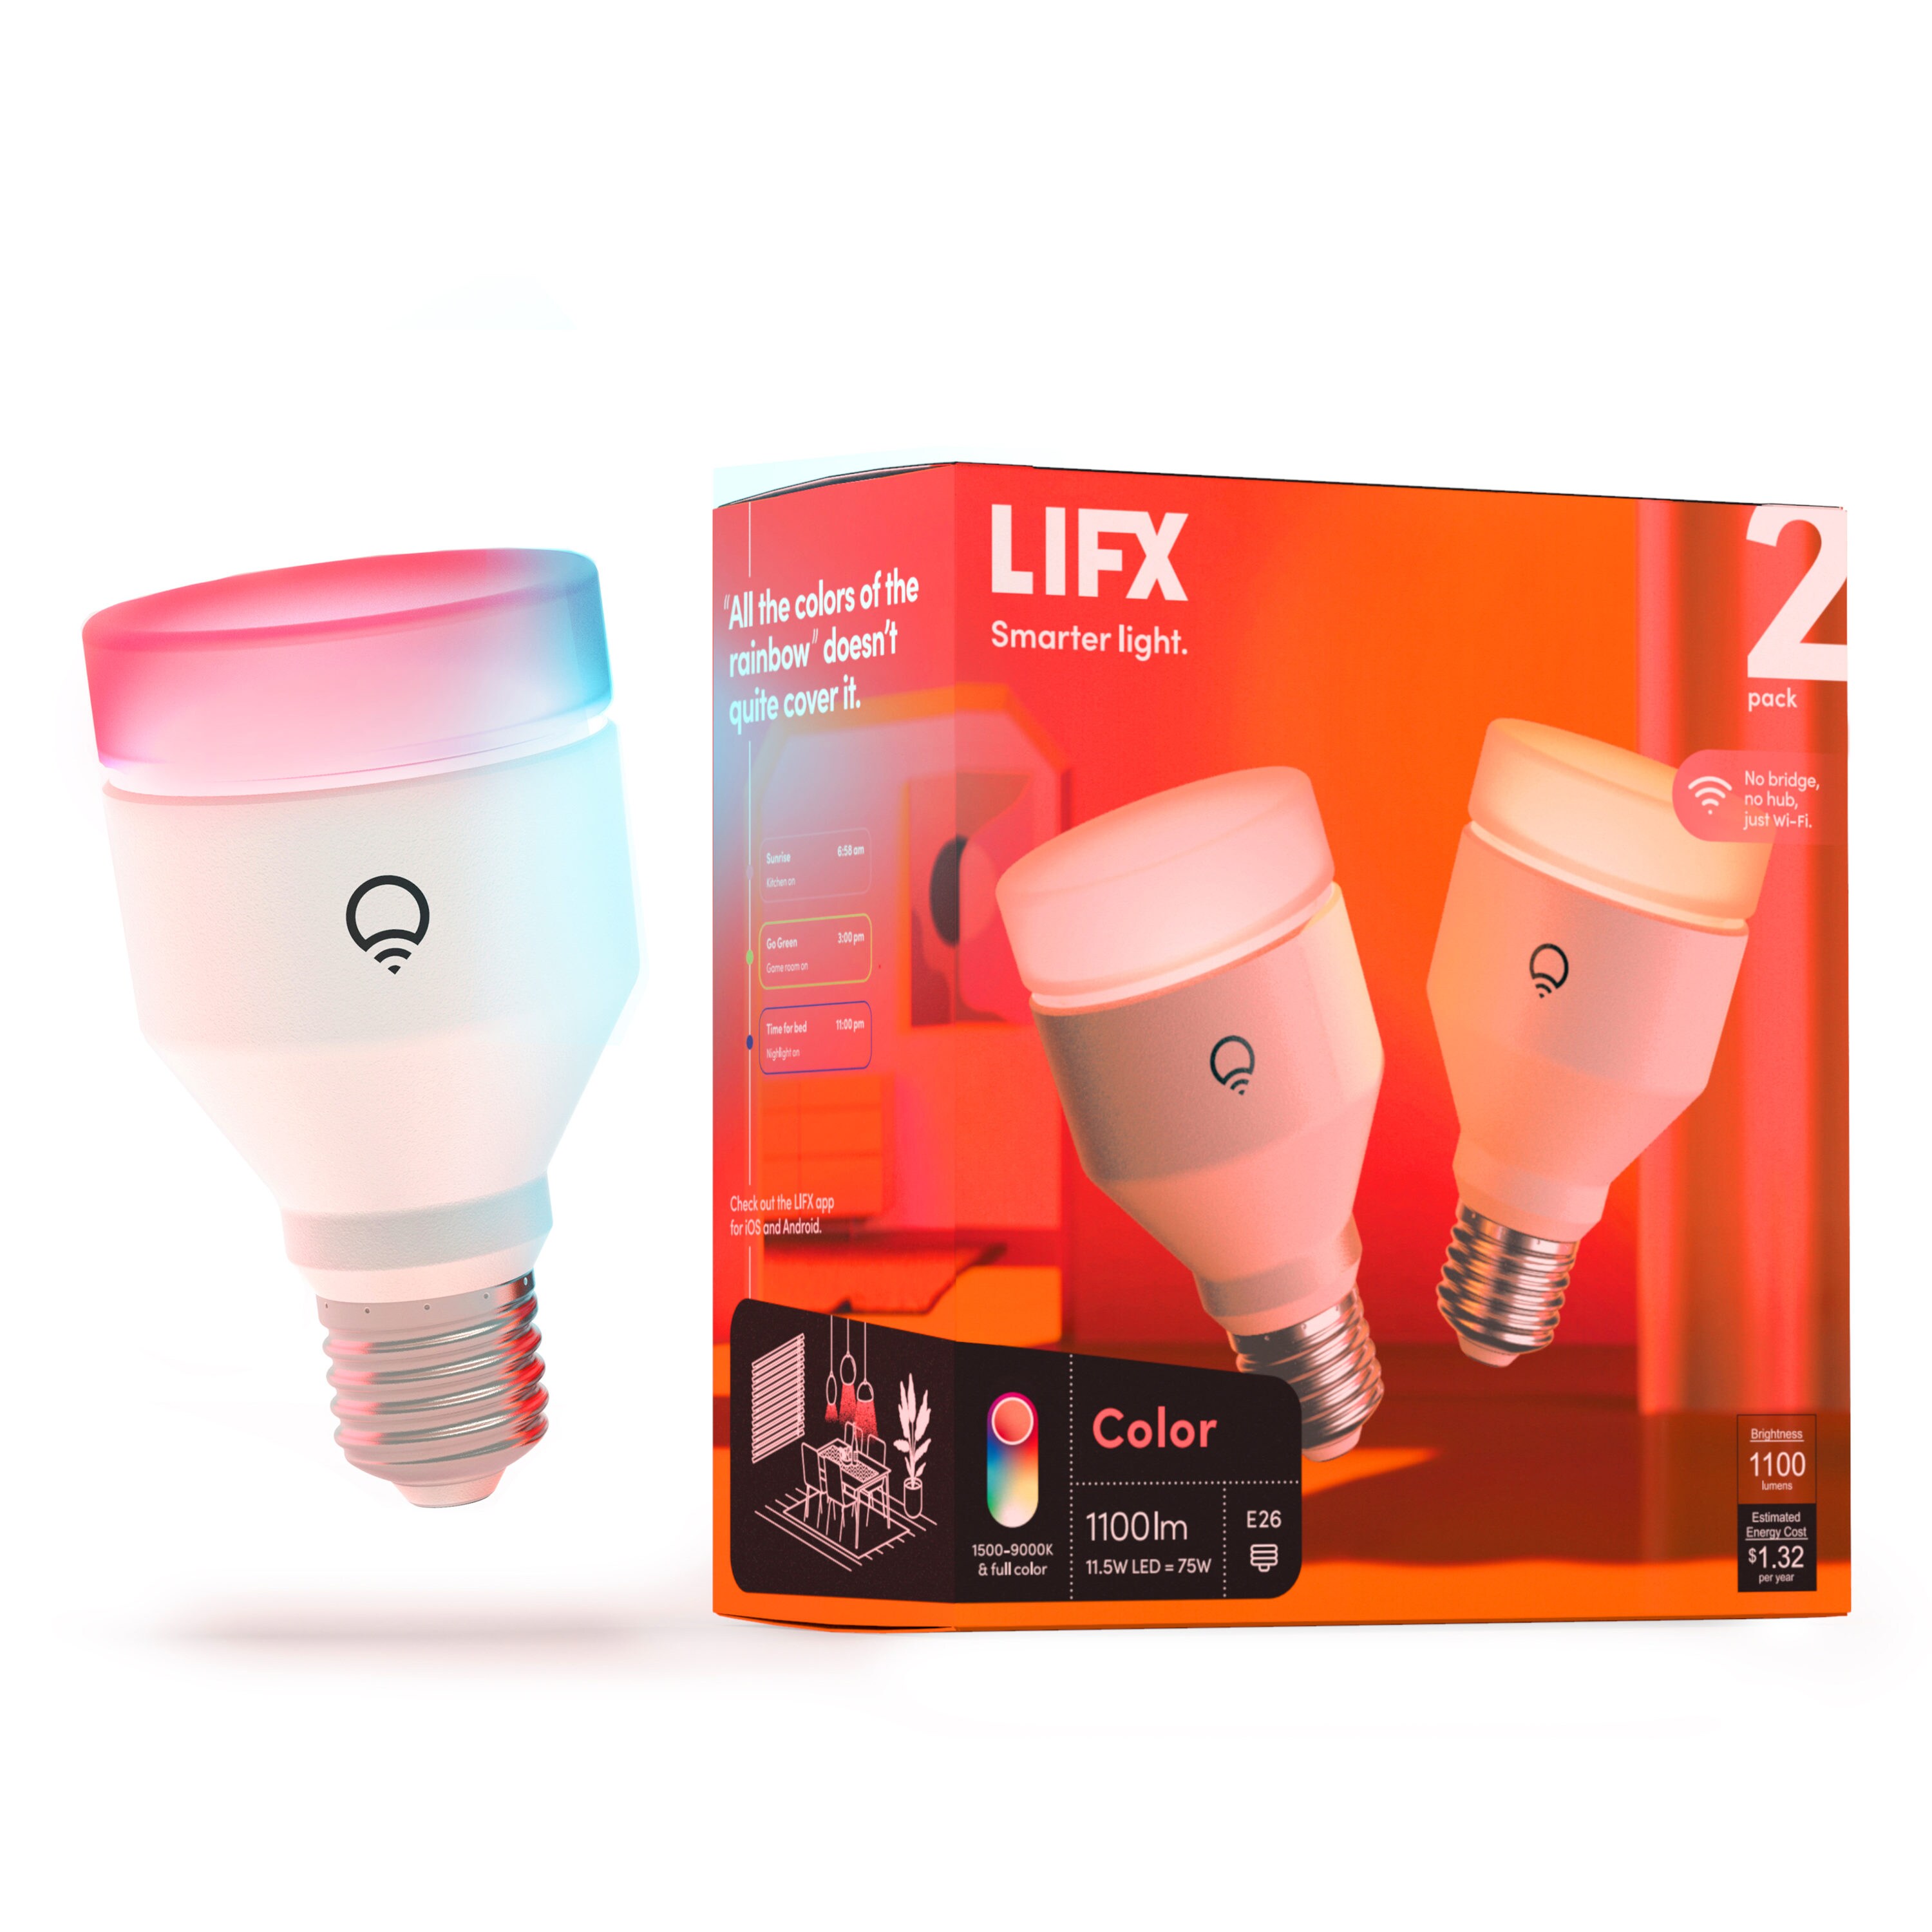 LIFX Color E26 1100lm Edison Screw 12-Watt EQ A19 Full Color Dimmable Smart LED Light Bulb (2-Pack) in Purpose LED Light Bulbs department at Lowes.com